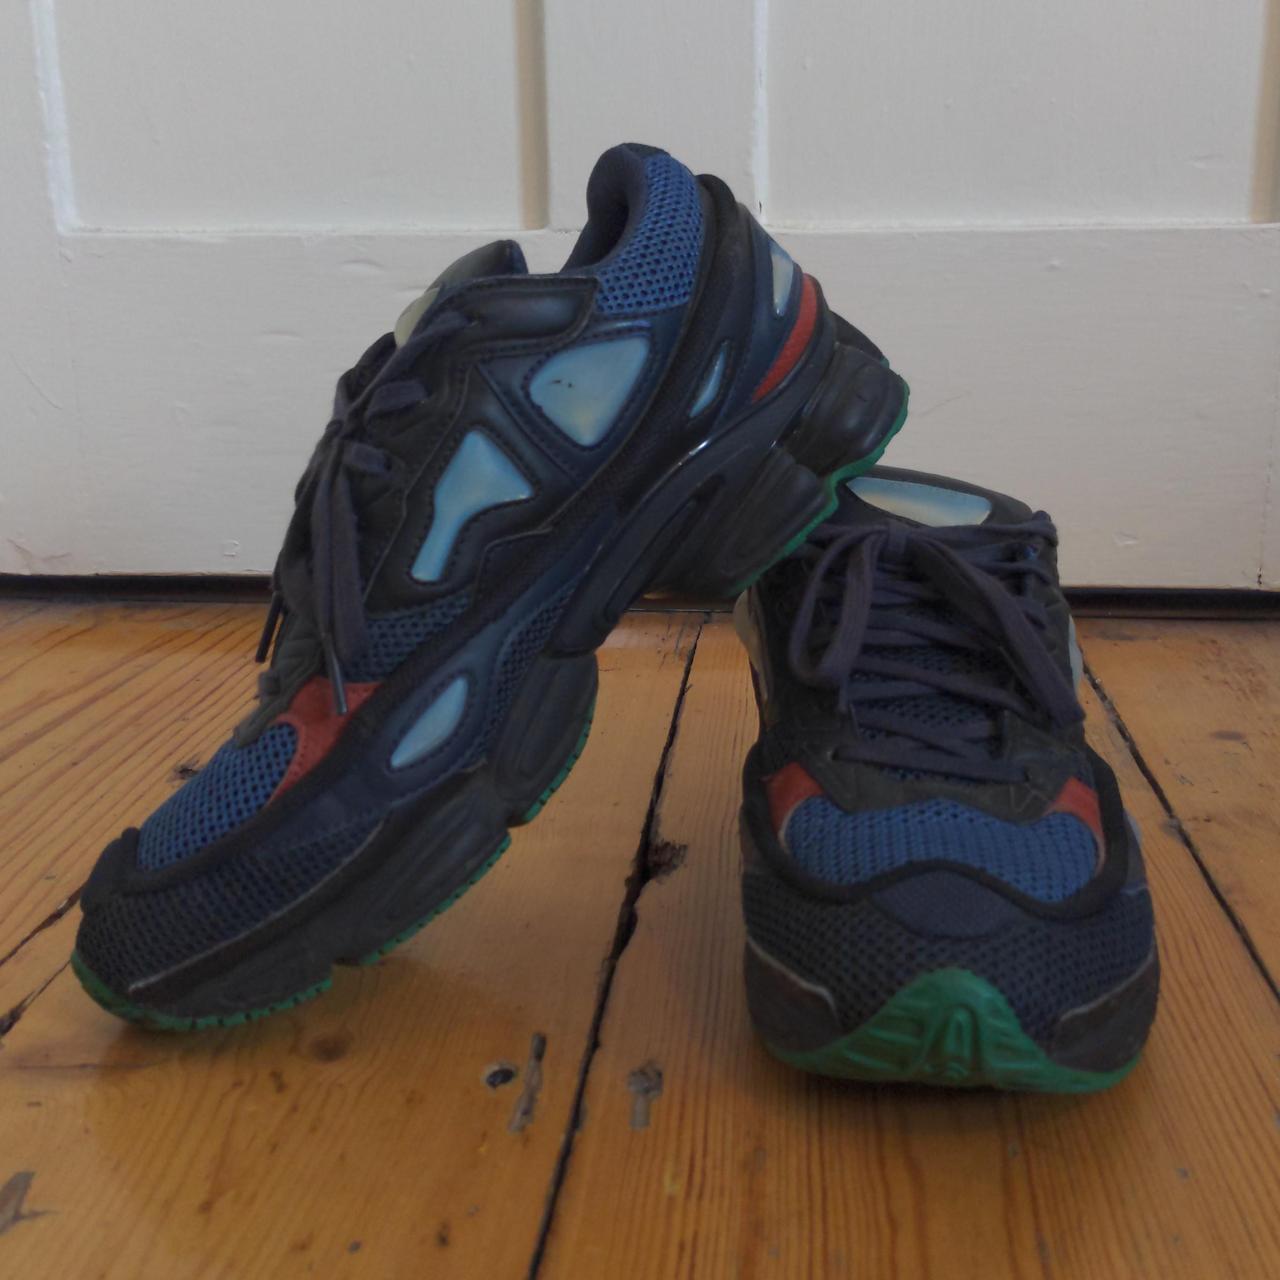 Raf Simons Men's Navy and Green Trainers